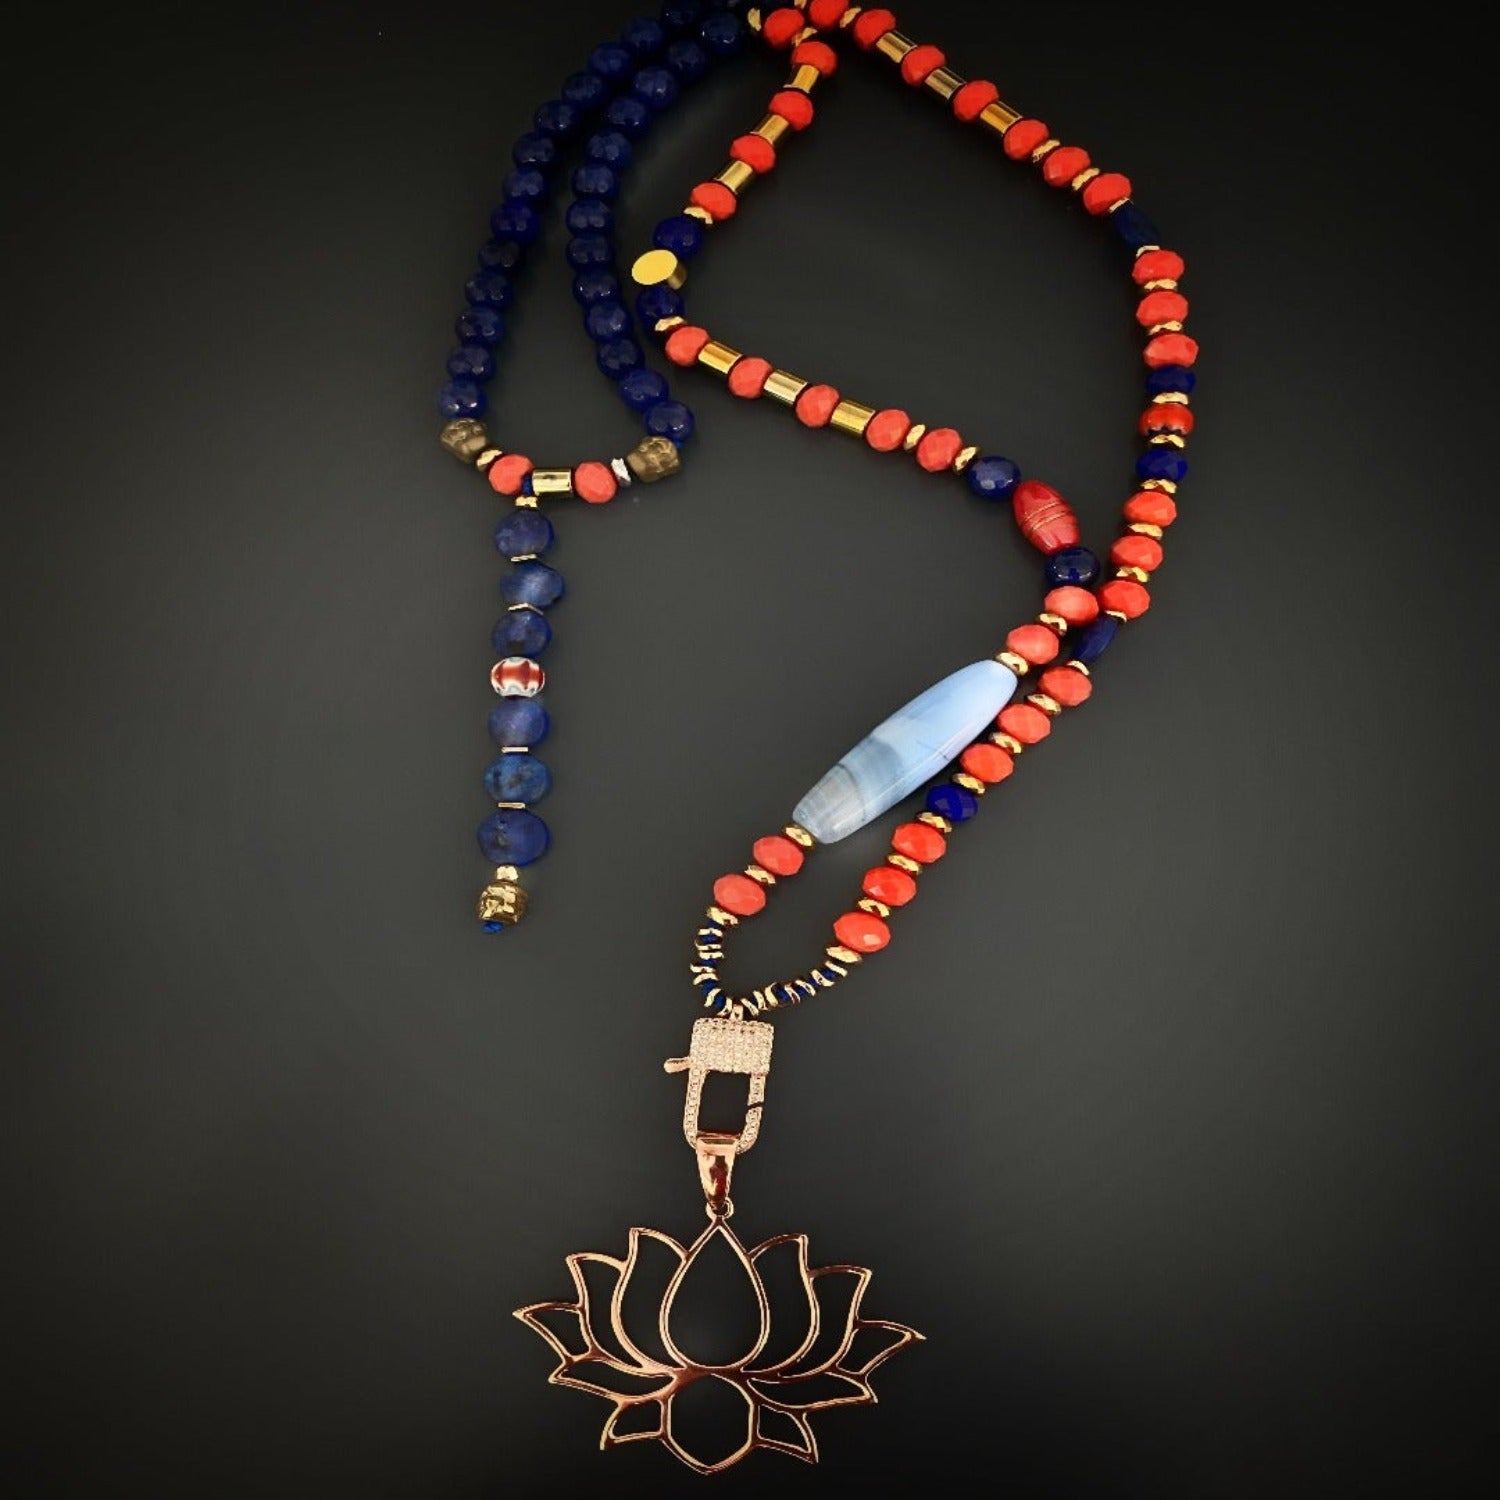 Find inspiration in the Lotus Flower Mandala Necklace, crafted with Lapis Lazuli and Blue Agate beads, symbolizing the journey to enlightenment and self-awareness.